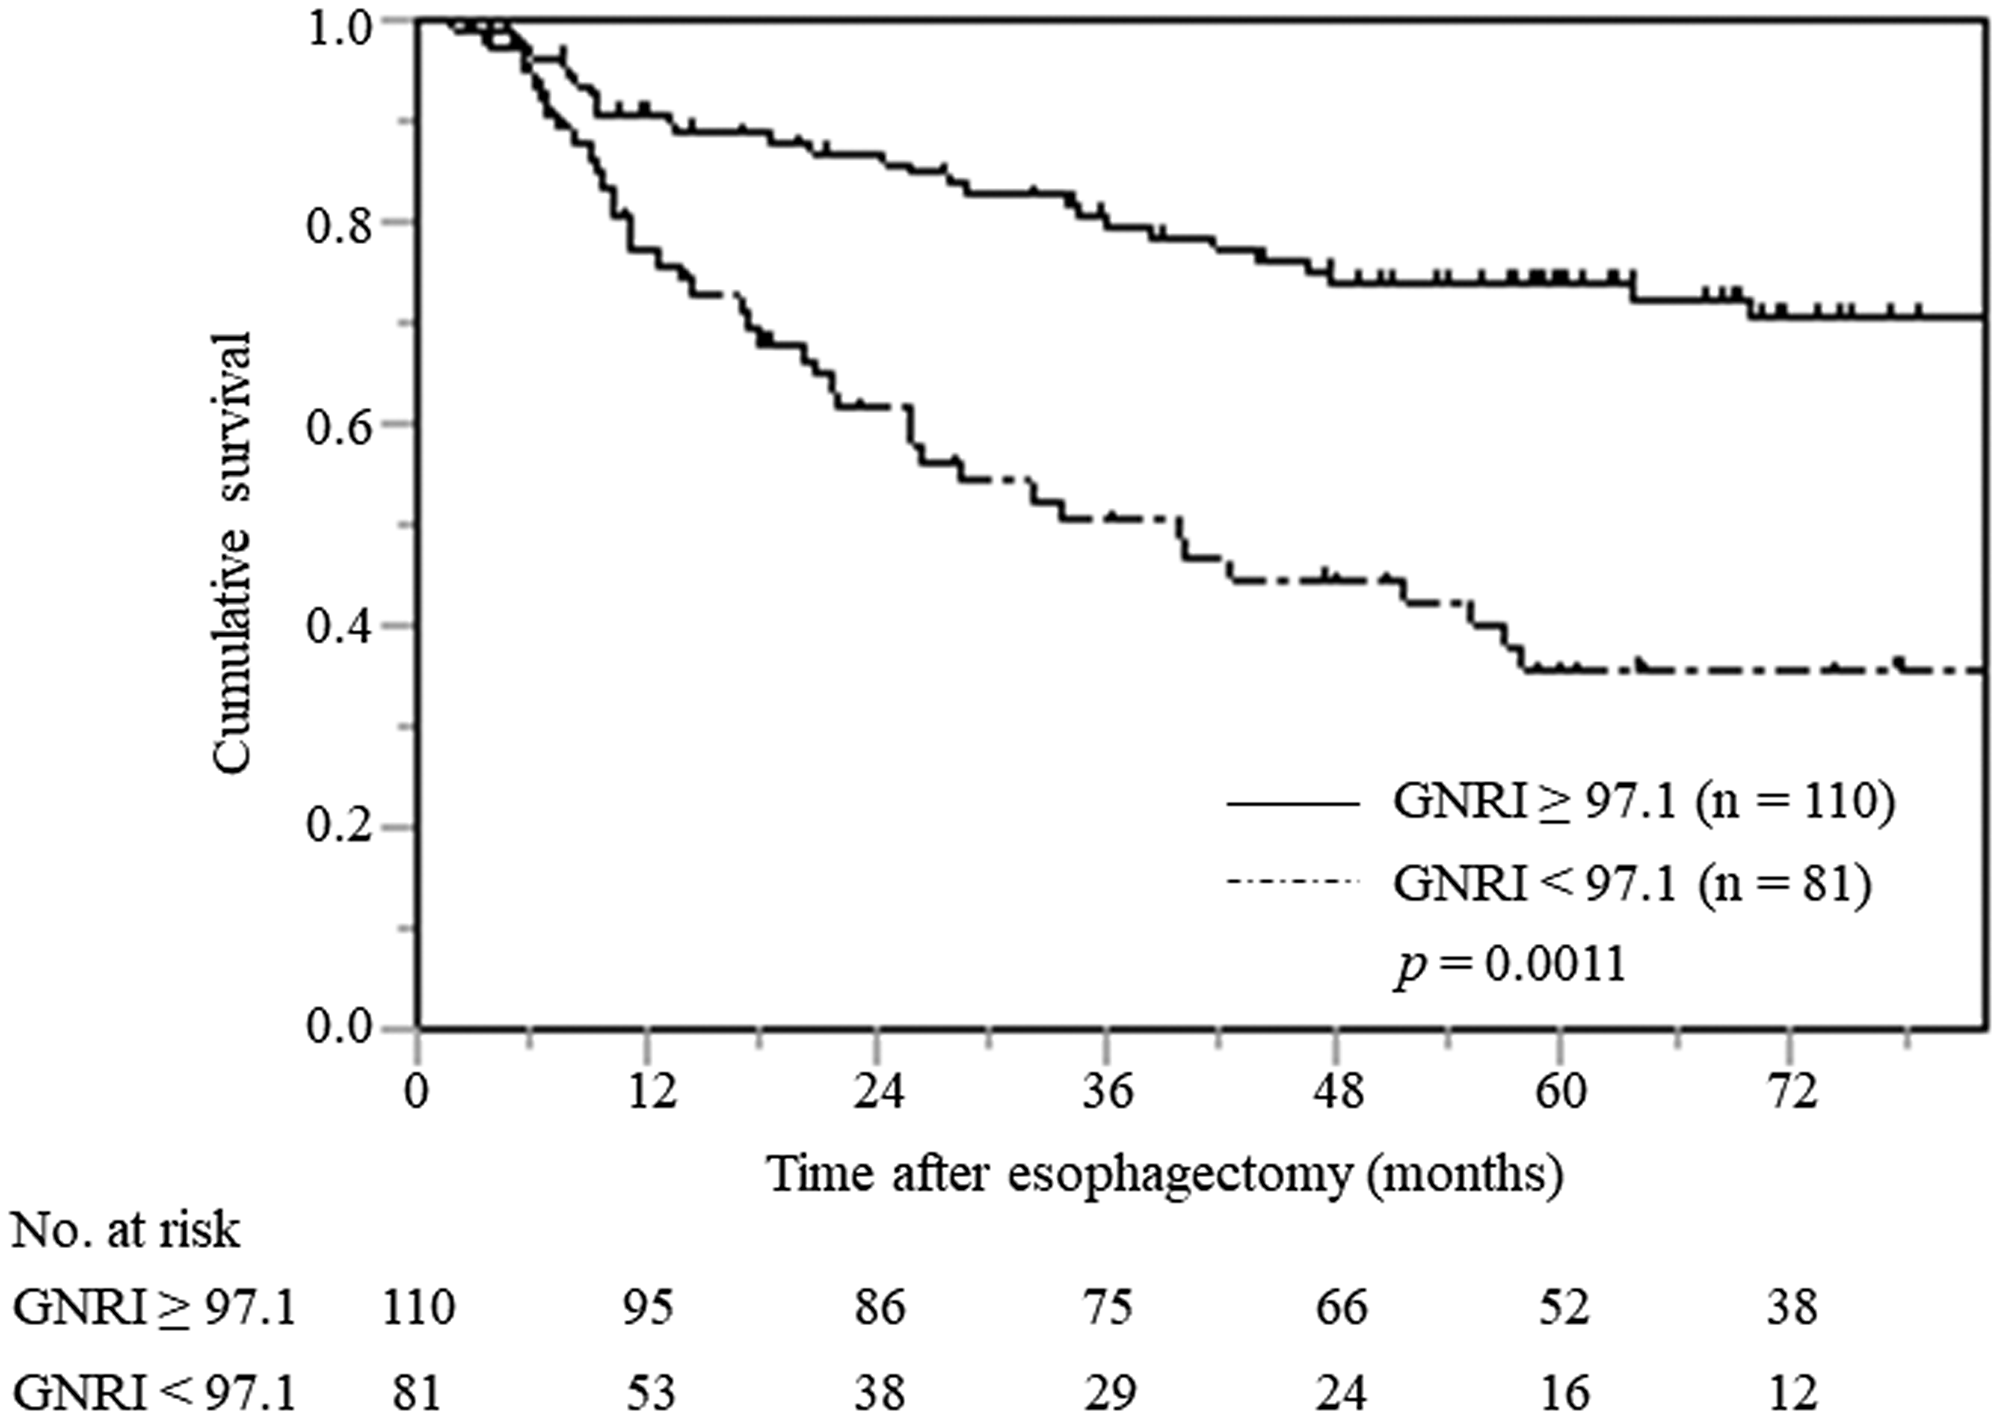 Cancer-specific survival curves in all patients with ESCC stratified by preoperative GNRI.